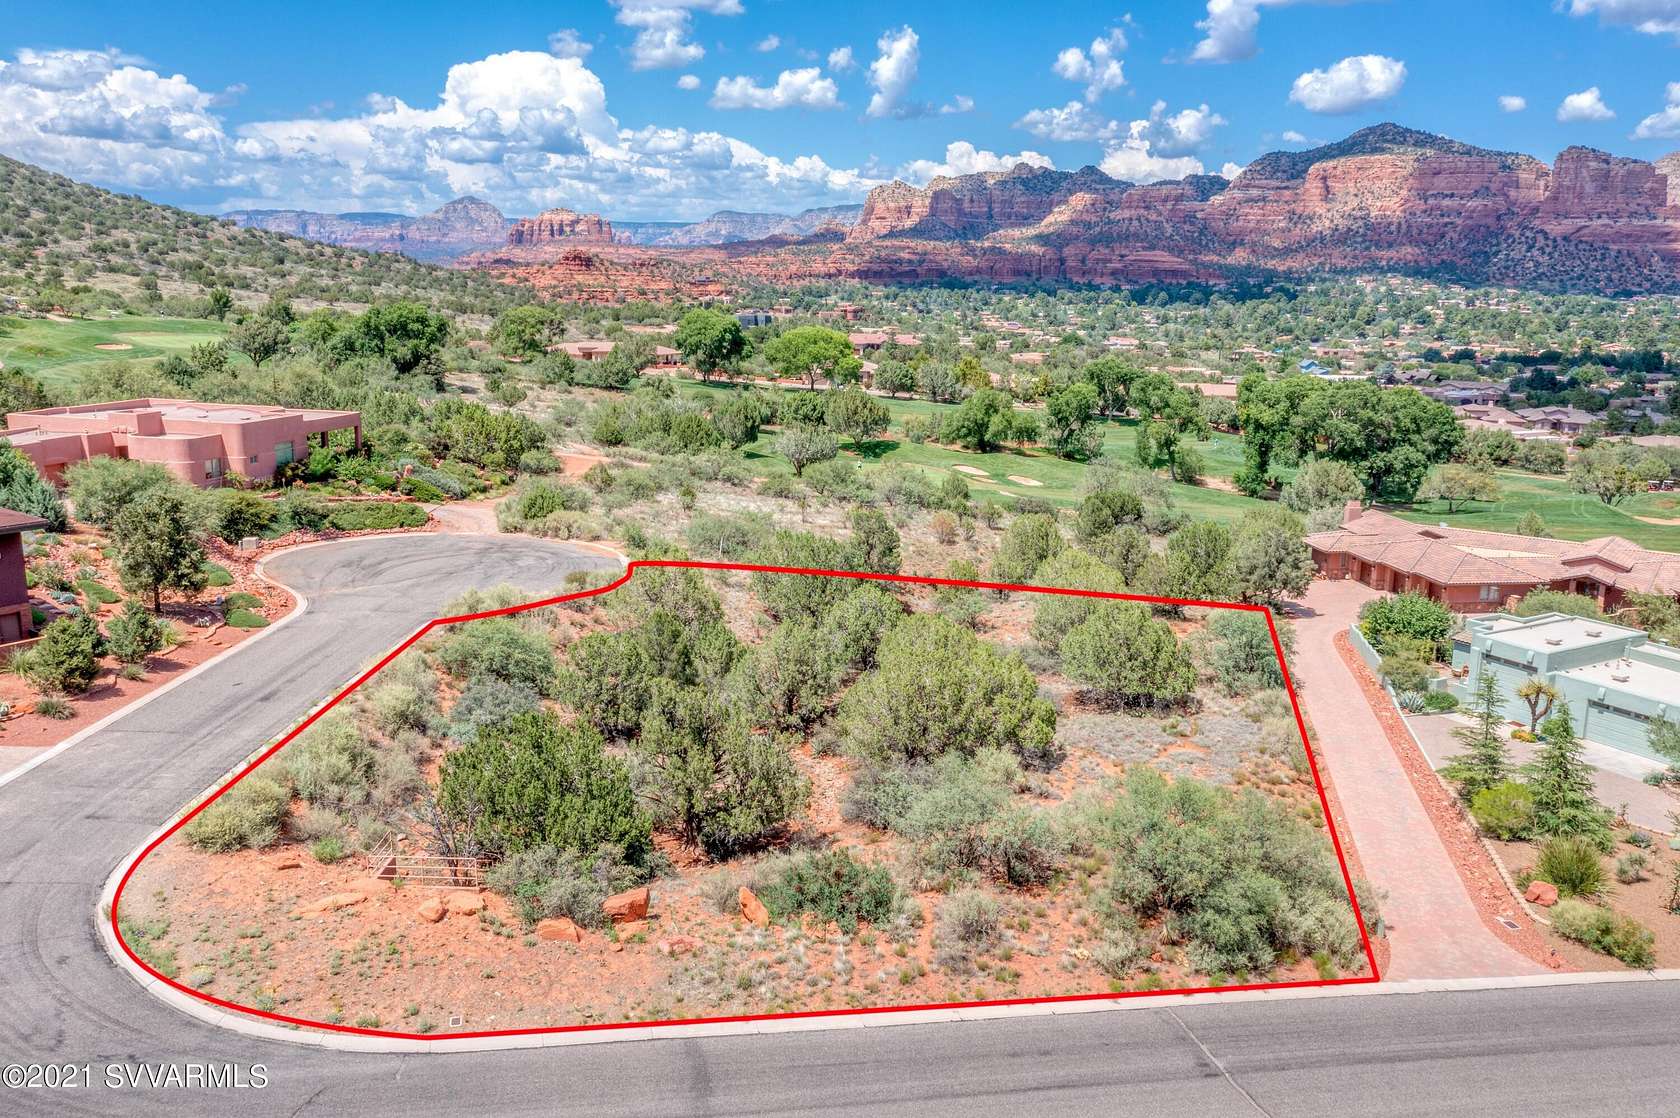 0.67 Acres of Residential Land for Sale in Sedona, Arizona